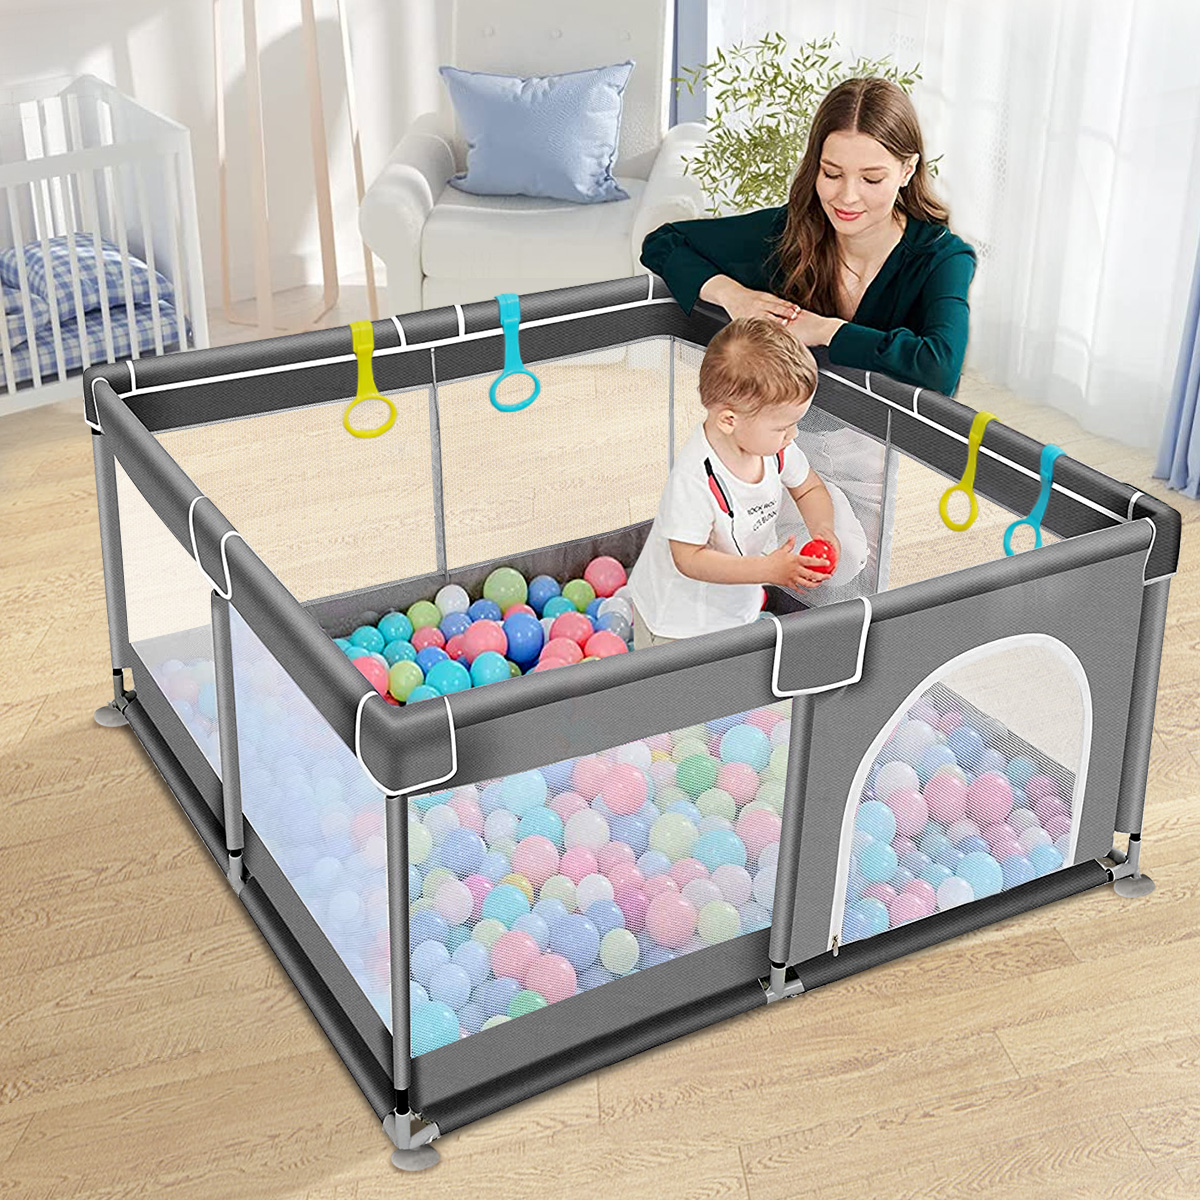 Baby Playpen, 36x36x27inch Portable Soft Mesh Sturdy Pipe Ample Space for Toddler, Gray - image 1 of 8